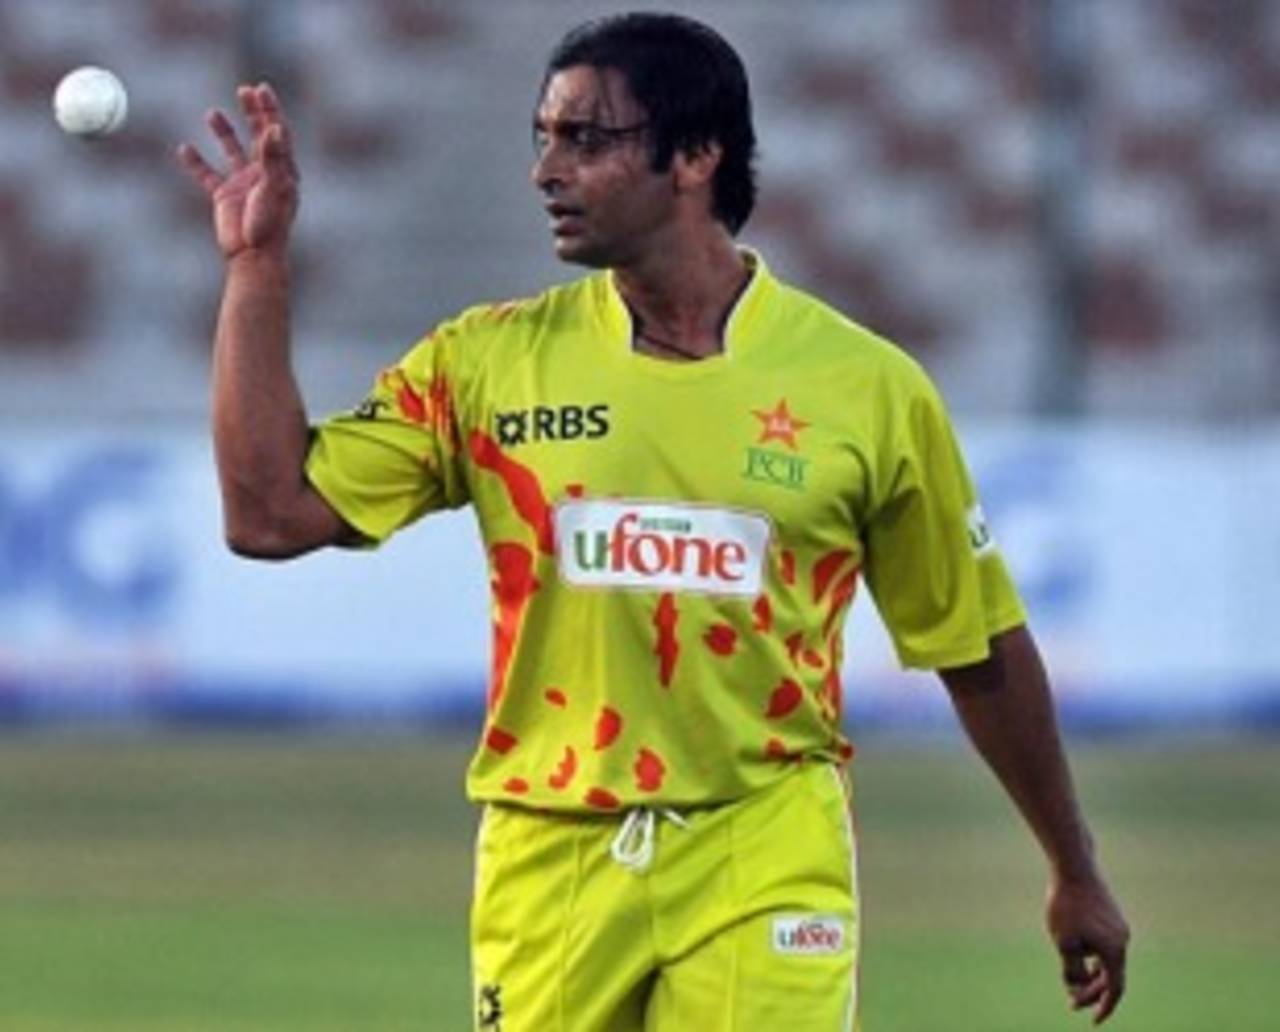 Shoaib Akhtar took 6 for 52 for Federal Areas Leopards, Federal Areas Leopards v Khyber-Pakhtunkhwa Panthers, RBS Pentangular One-Day Cup, Karachi, April 21, 2010